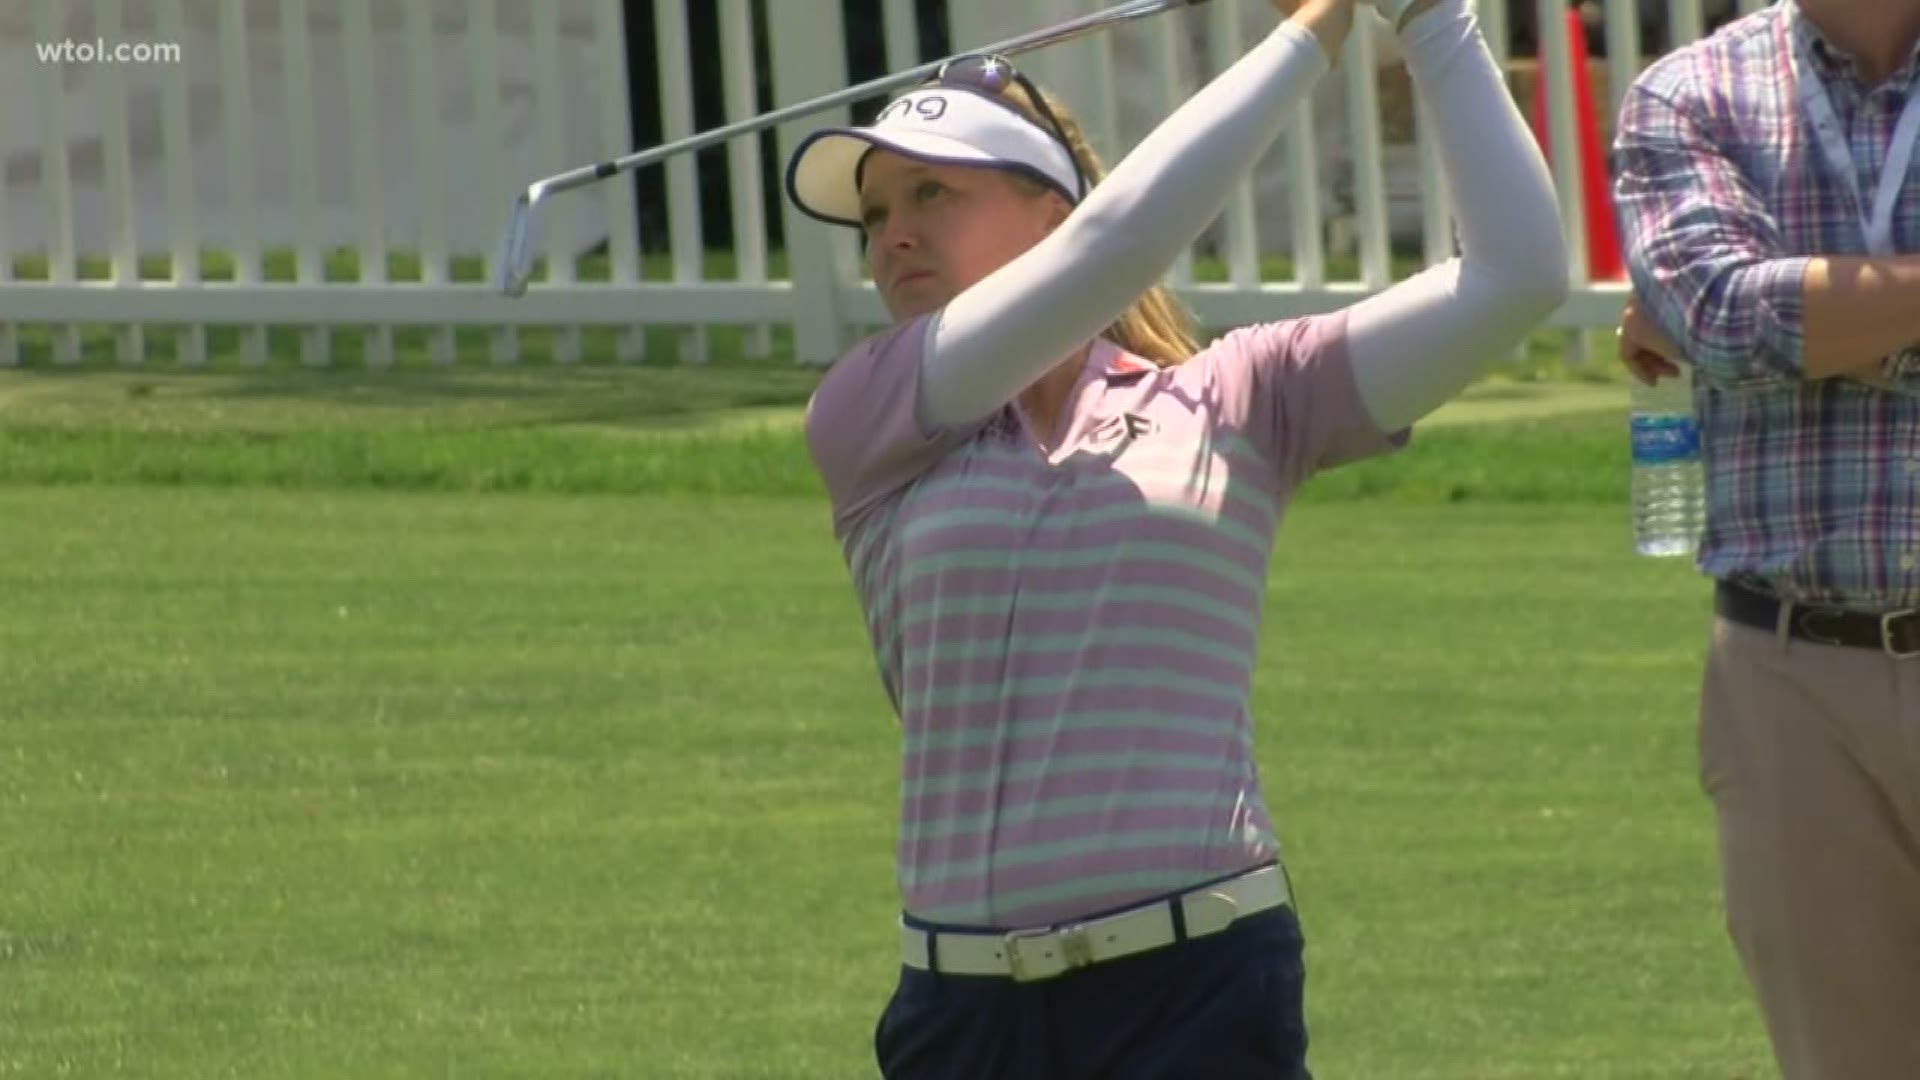 Brooke Henderson has the most professional wins among Canadian golfers and she's only 21 years old. Now, she is looking to win this week's tournament.